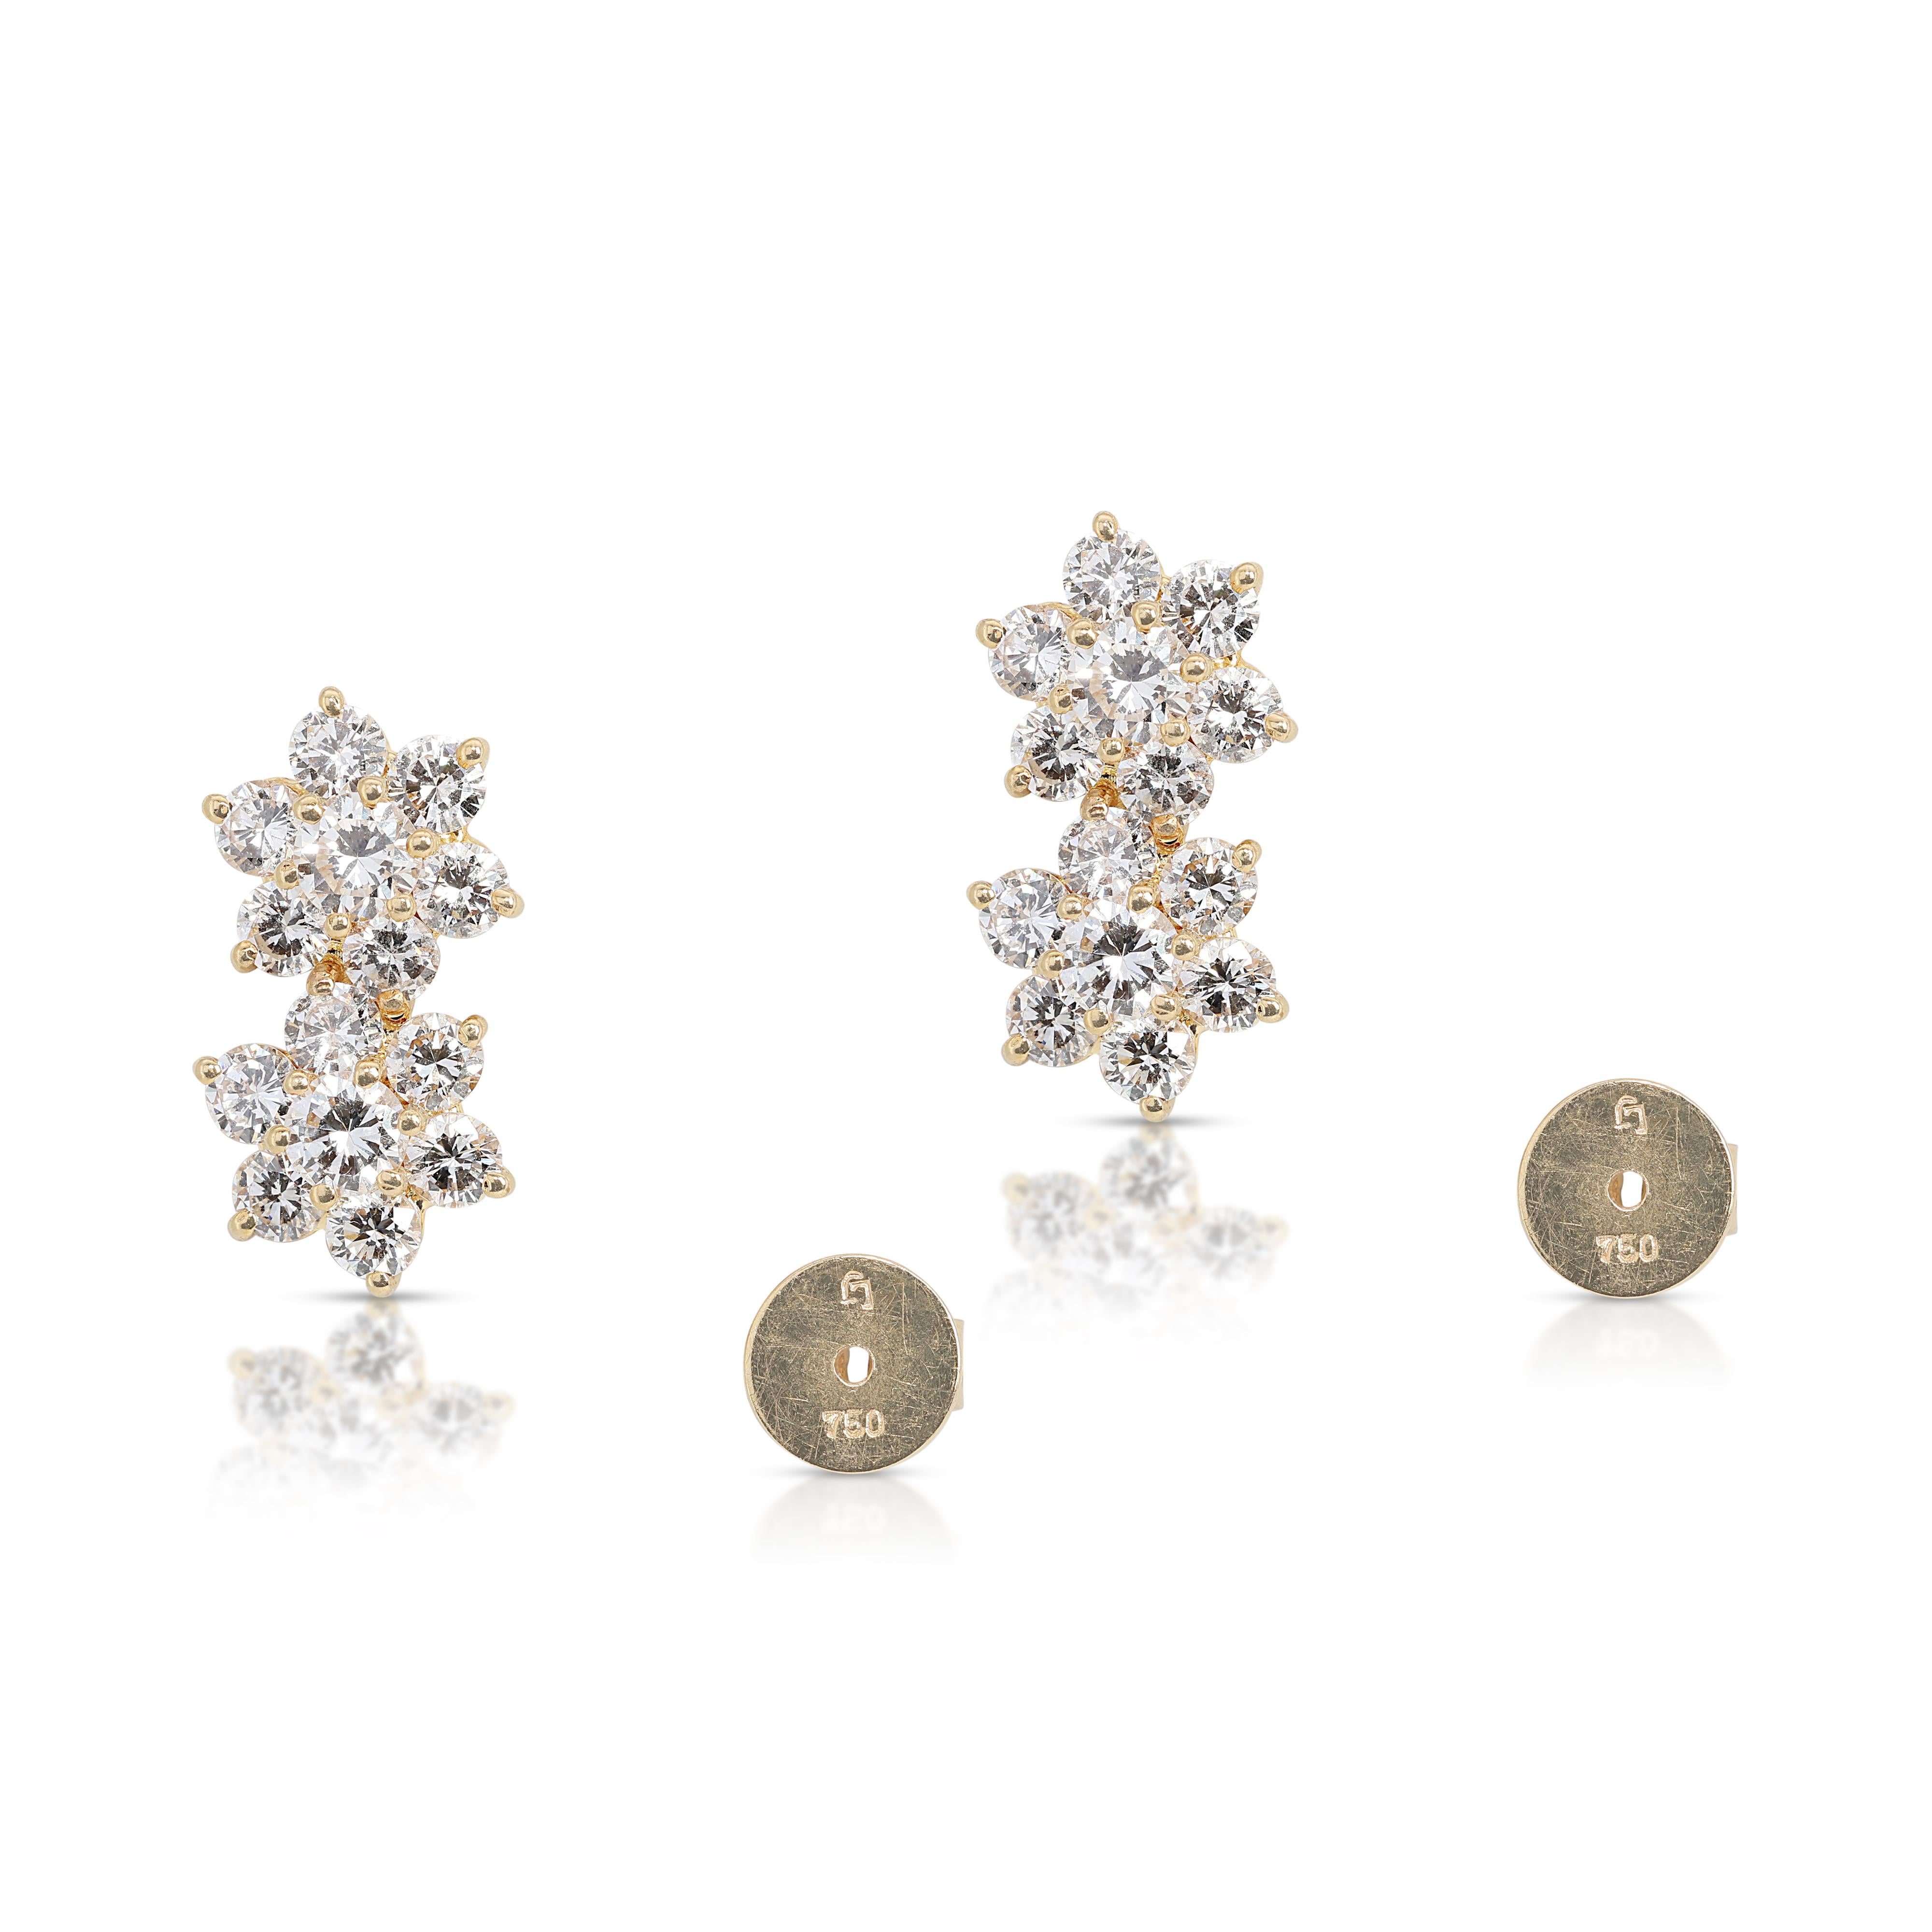 Stunning 1.52ct Diamonds Stud Earrings in 18K Yellow Gold For Sale 2